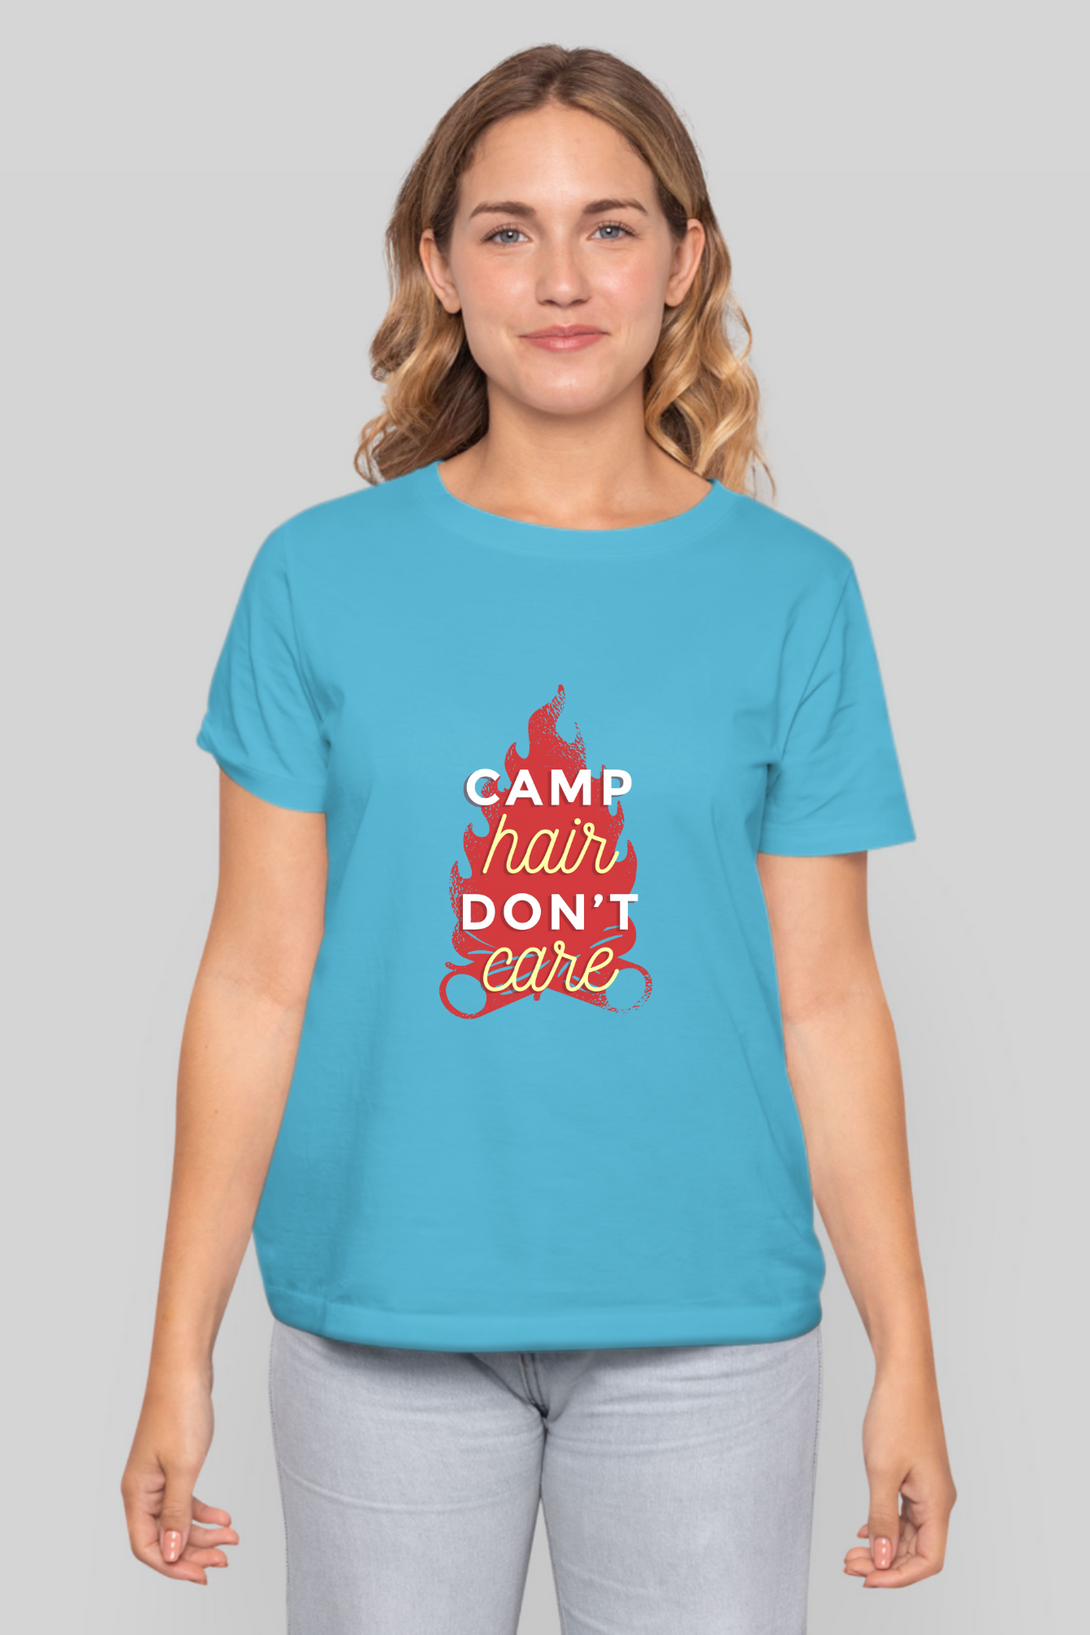 Camping Vibes Printed T-Shirt For Women - WowWaves - 10